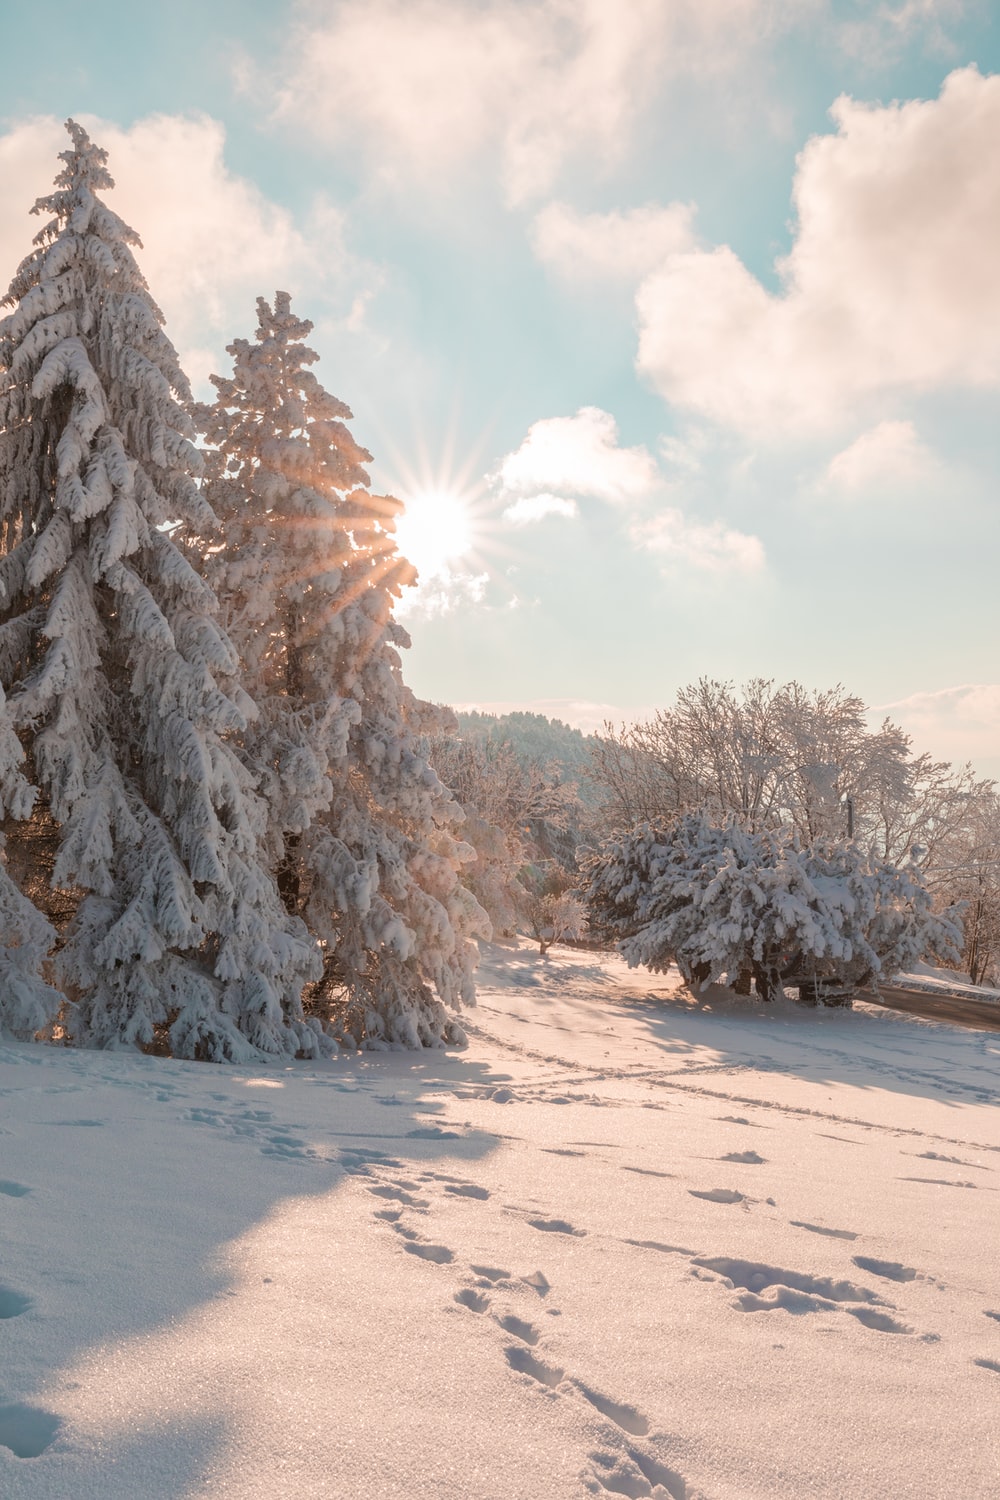 Winter Landscape Picture [Stunning!]. Download Free Image